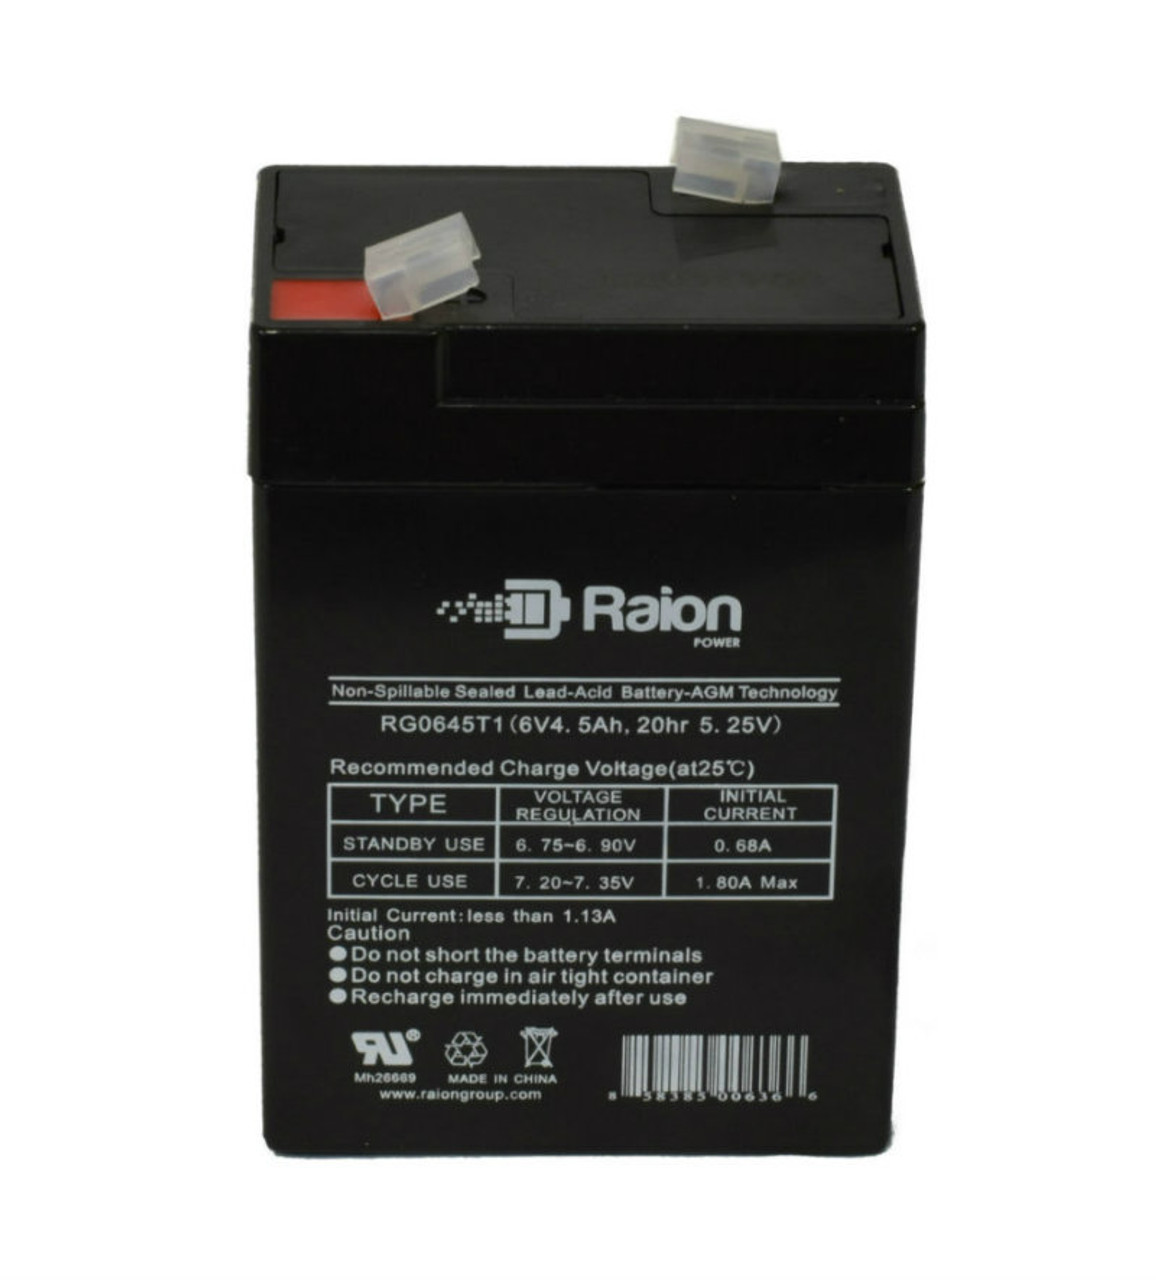 Raion Power RG0645T1 Replacement Battery Cartridge for Big Beam 2ET6S5